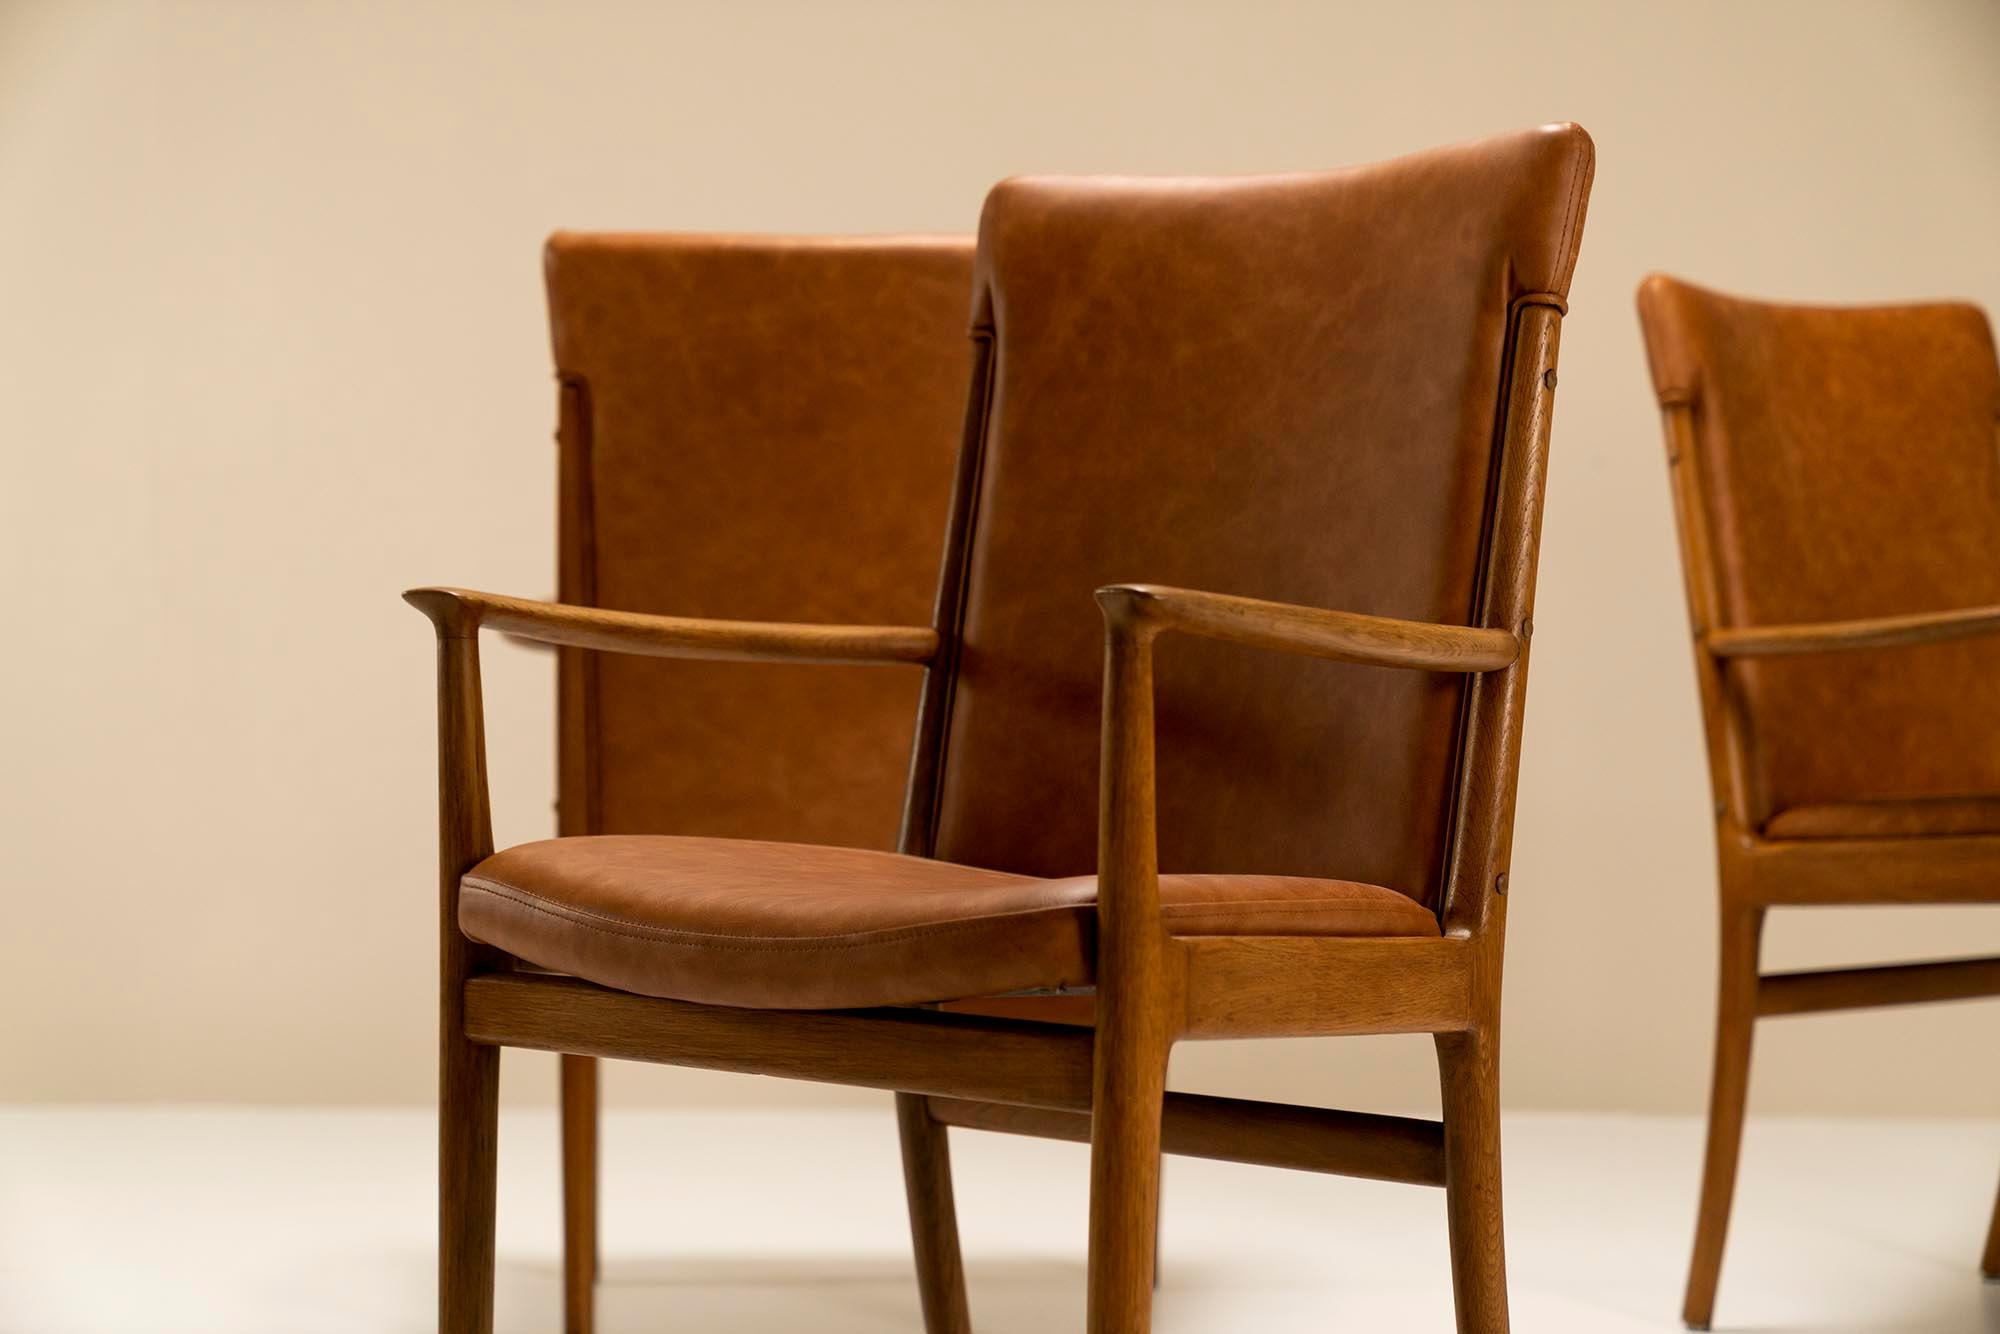 Four Armchairs in Ash Wood and Leather by Kai Lyngfeldt Larsen, Denmark, 1960s For Sale 8